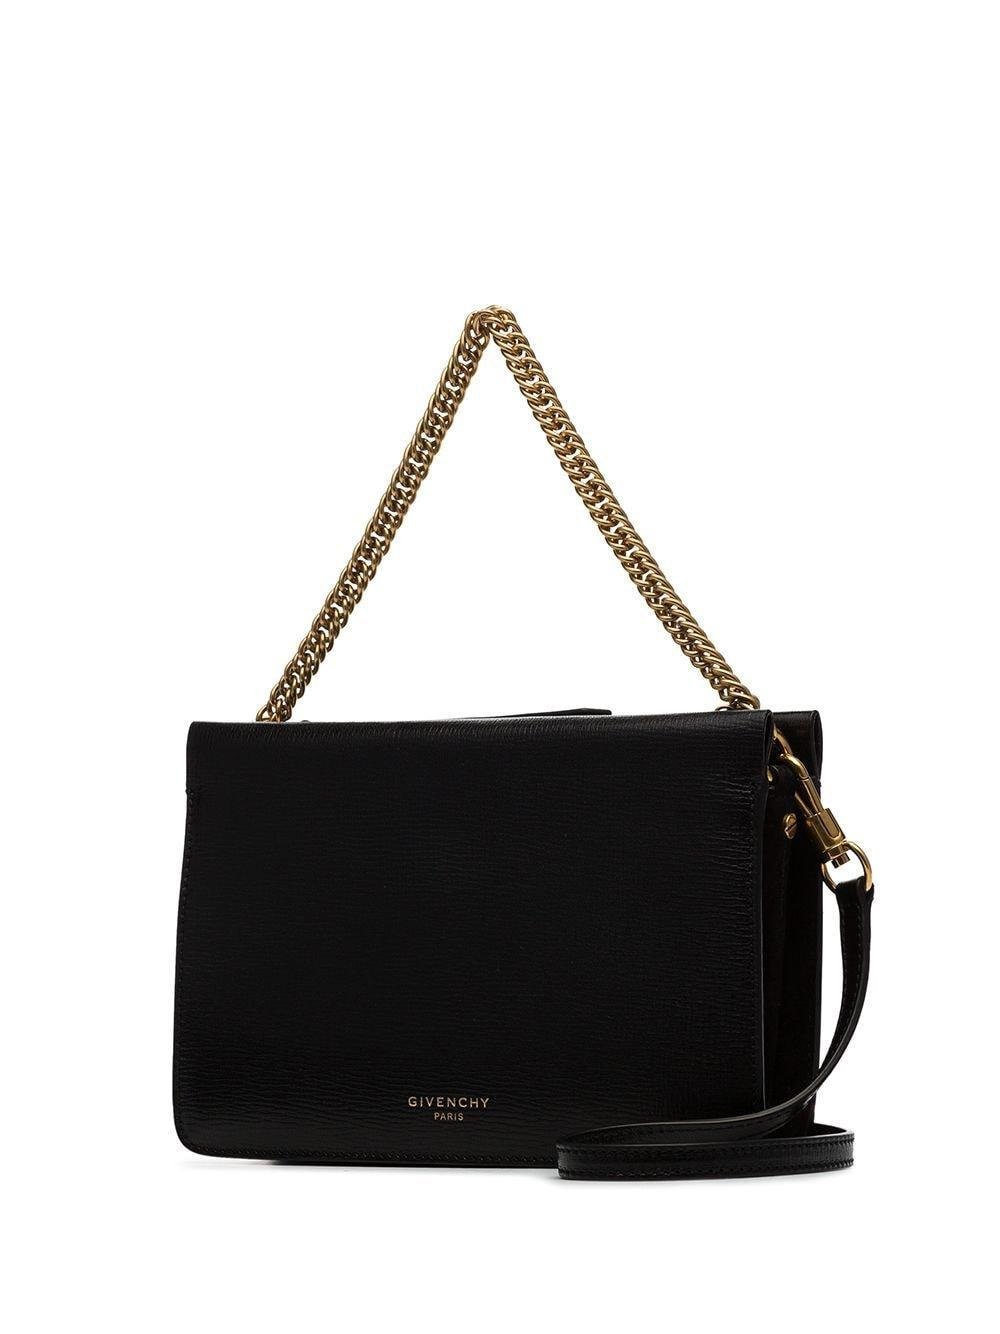 Givenchy Chain Handle Crossbody Bag in Black | Lyst